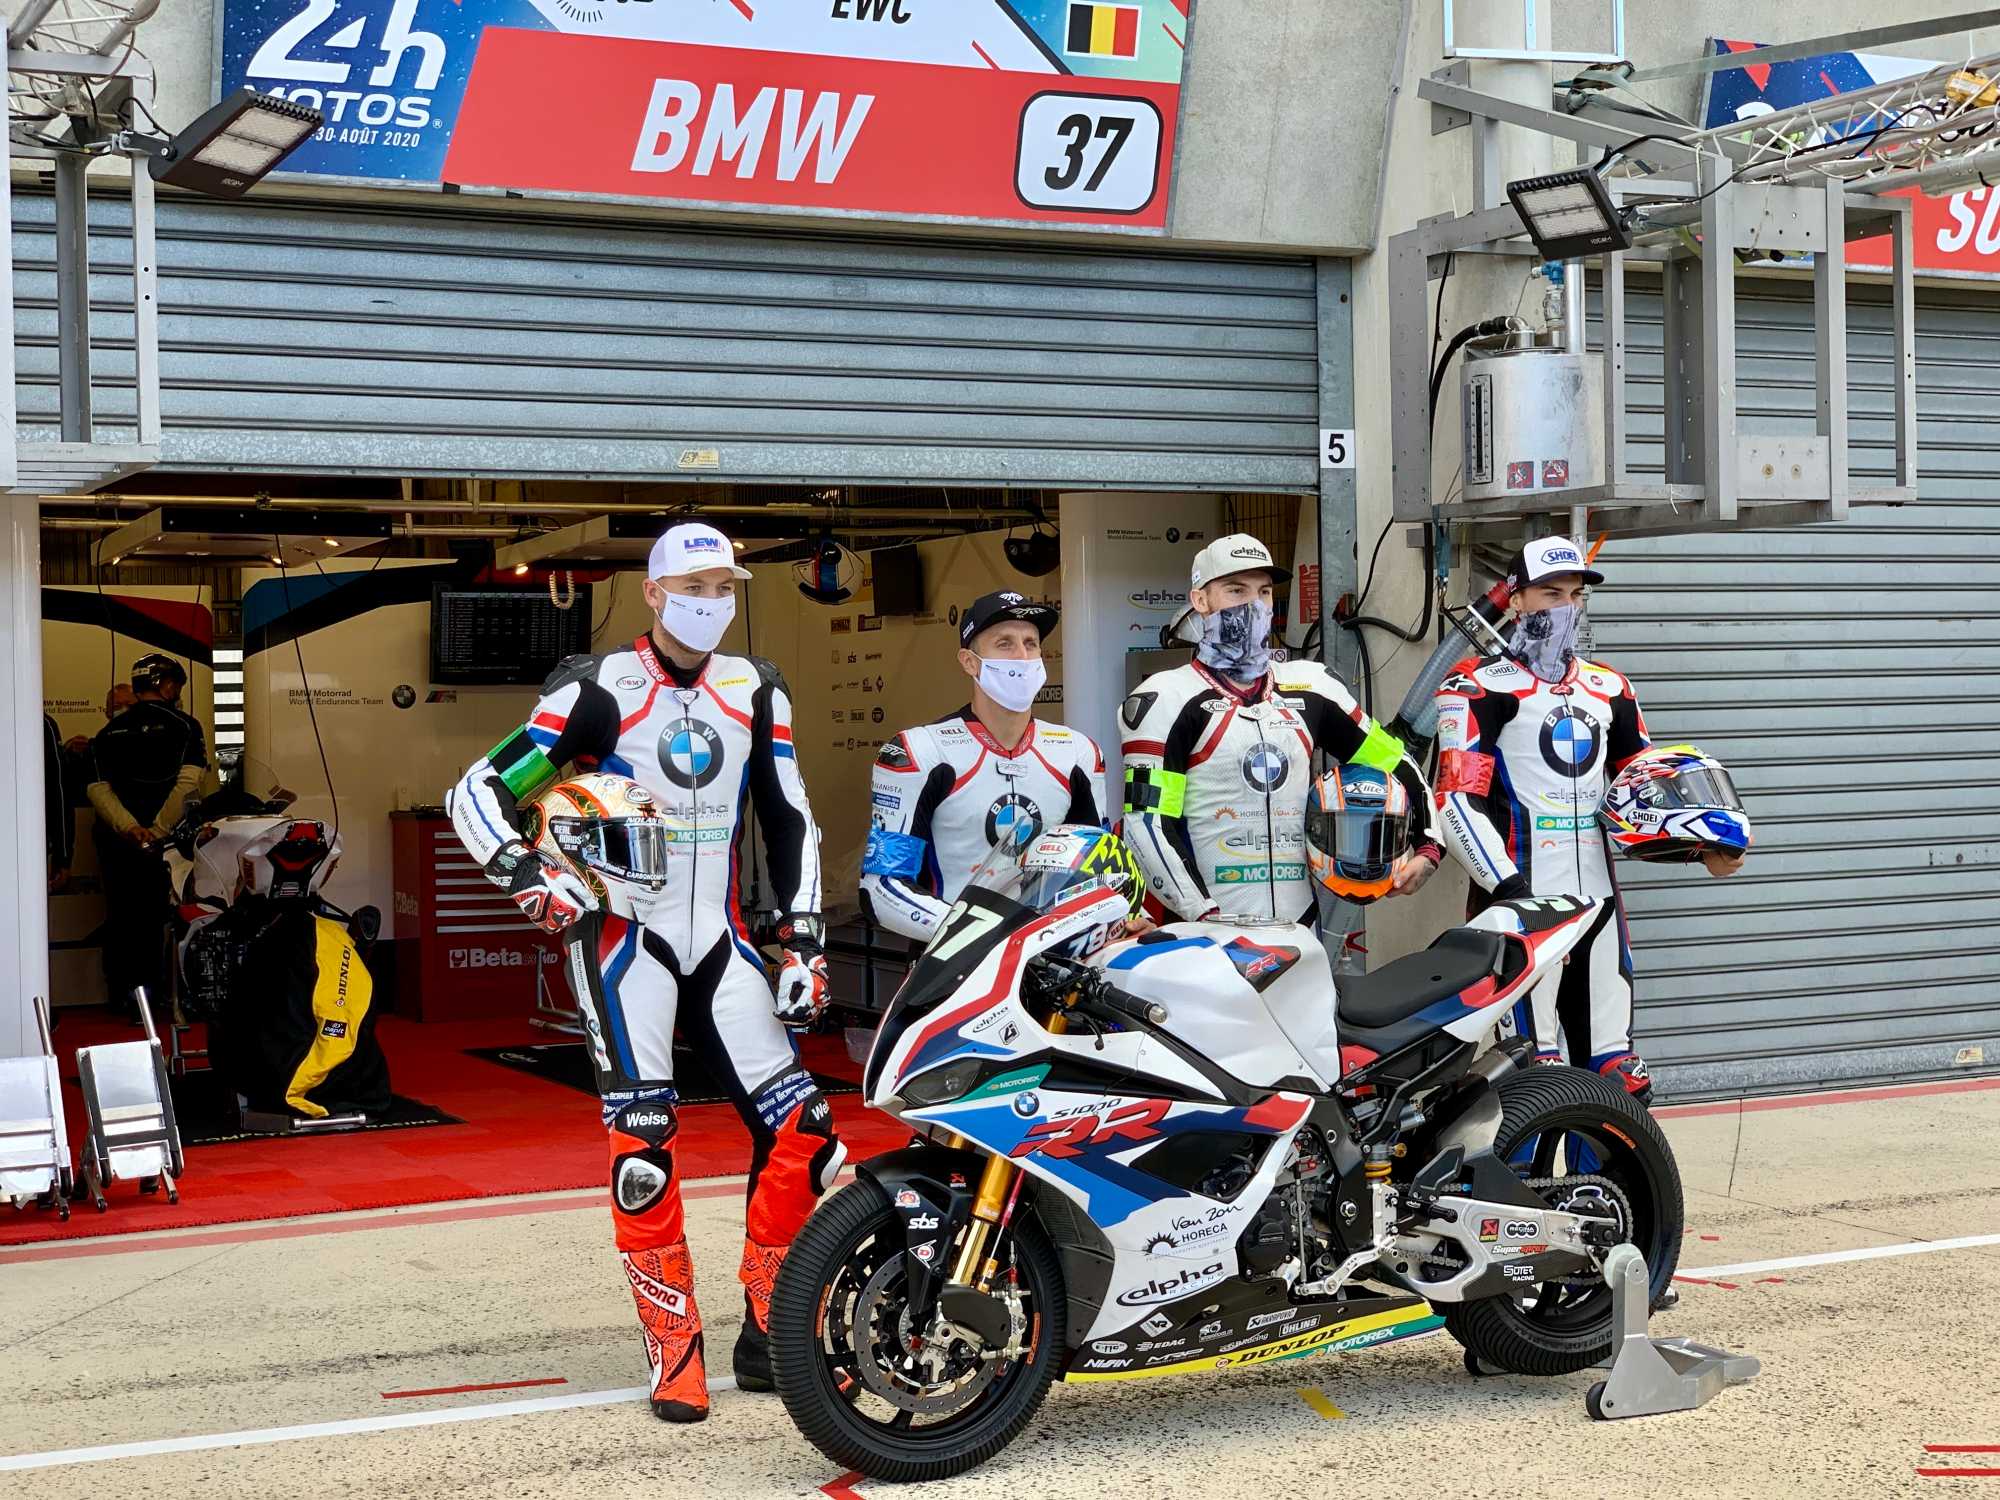 Dramatic for BMW Motorrad World Team at the “24 Heures Motos” in Le Mans.